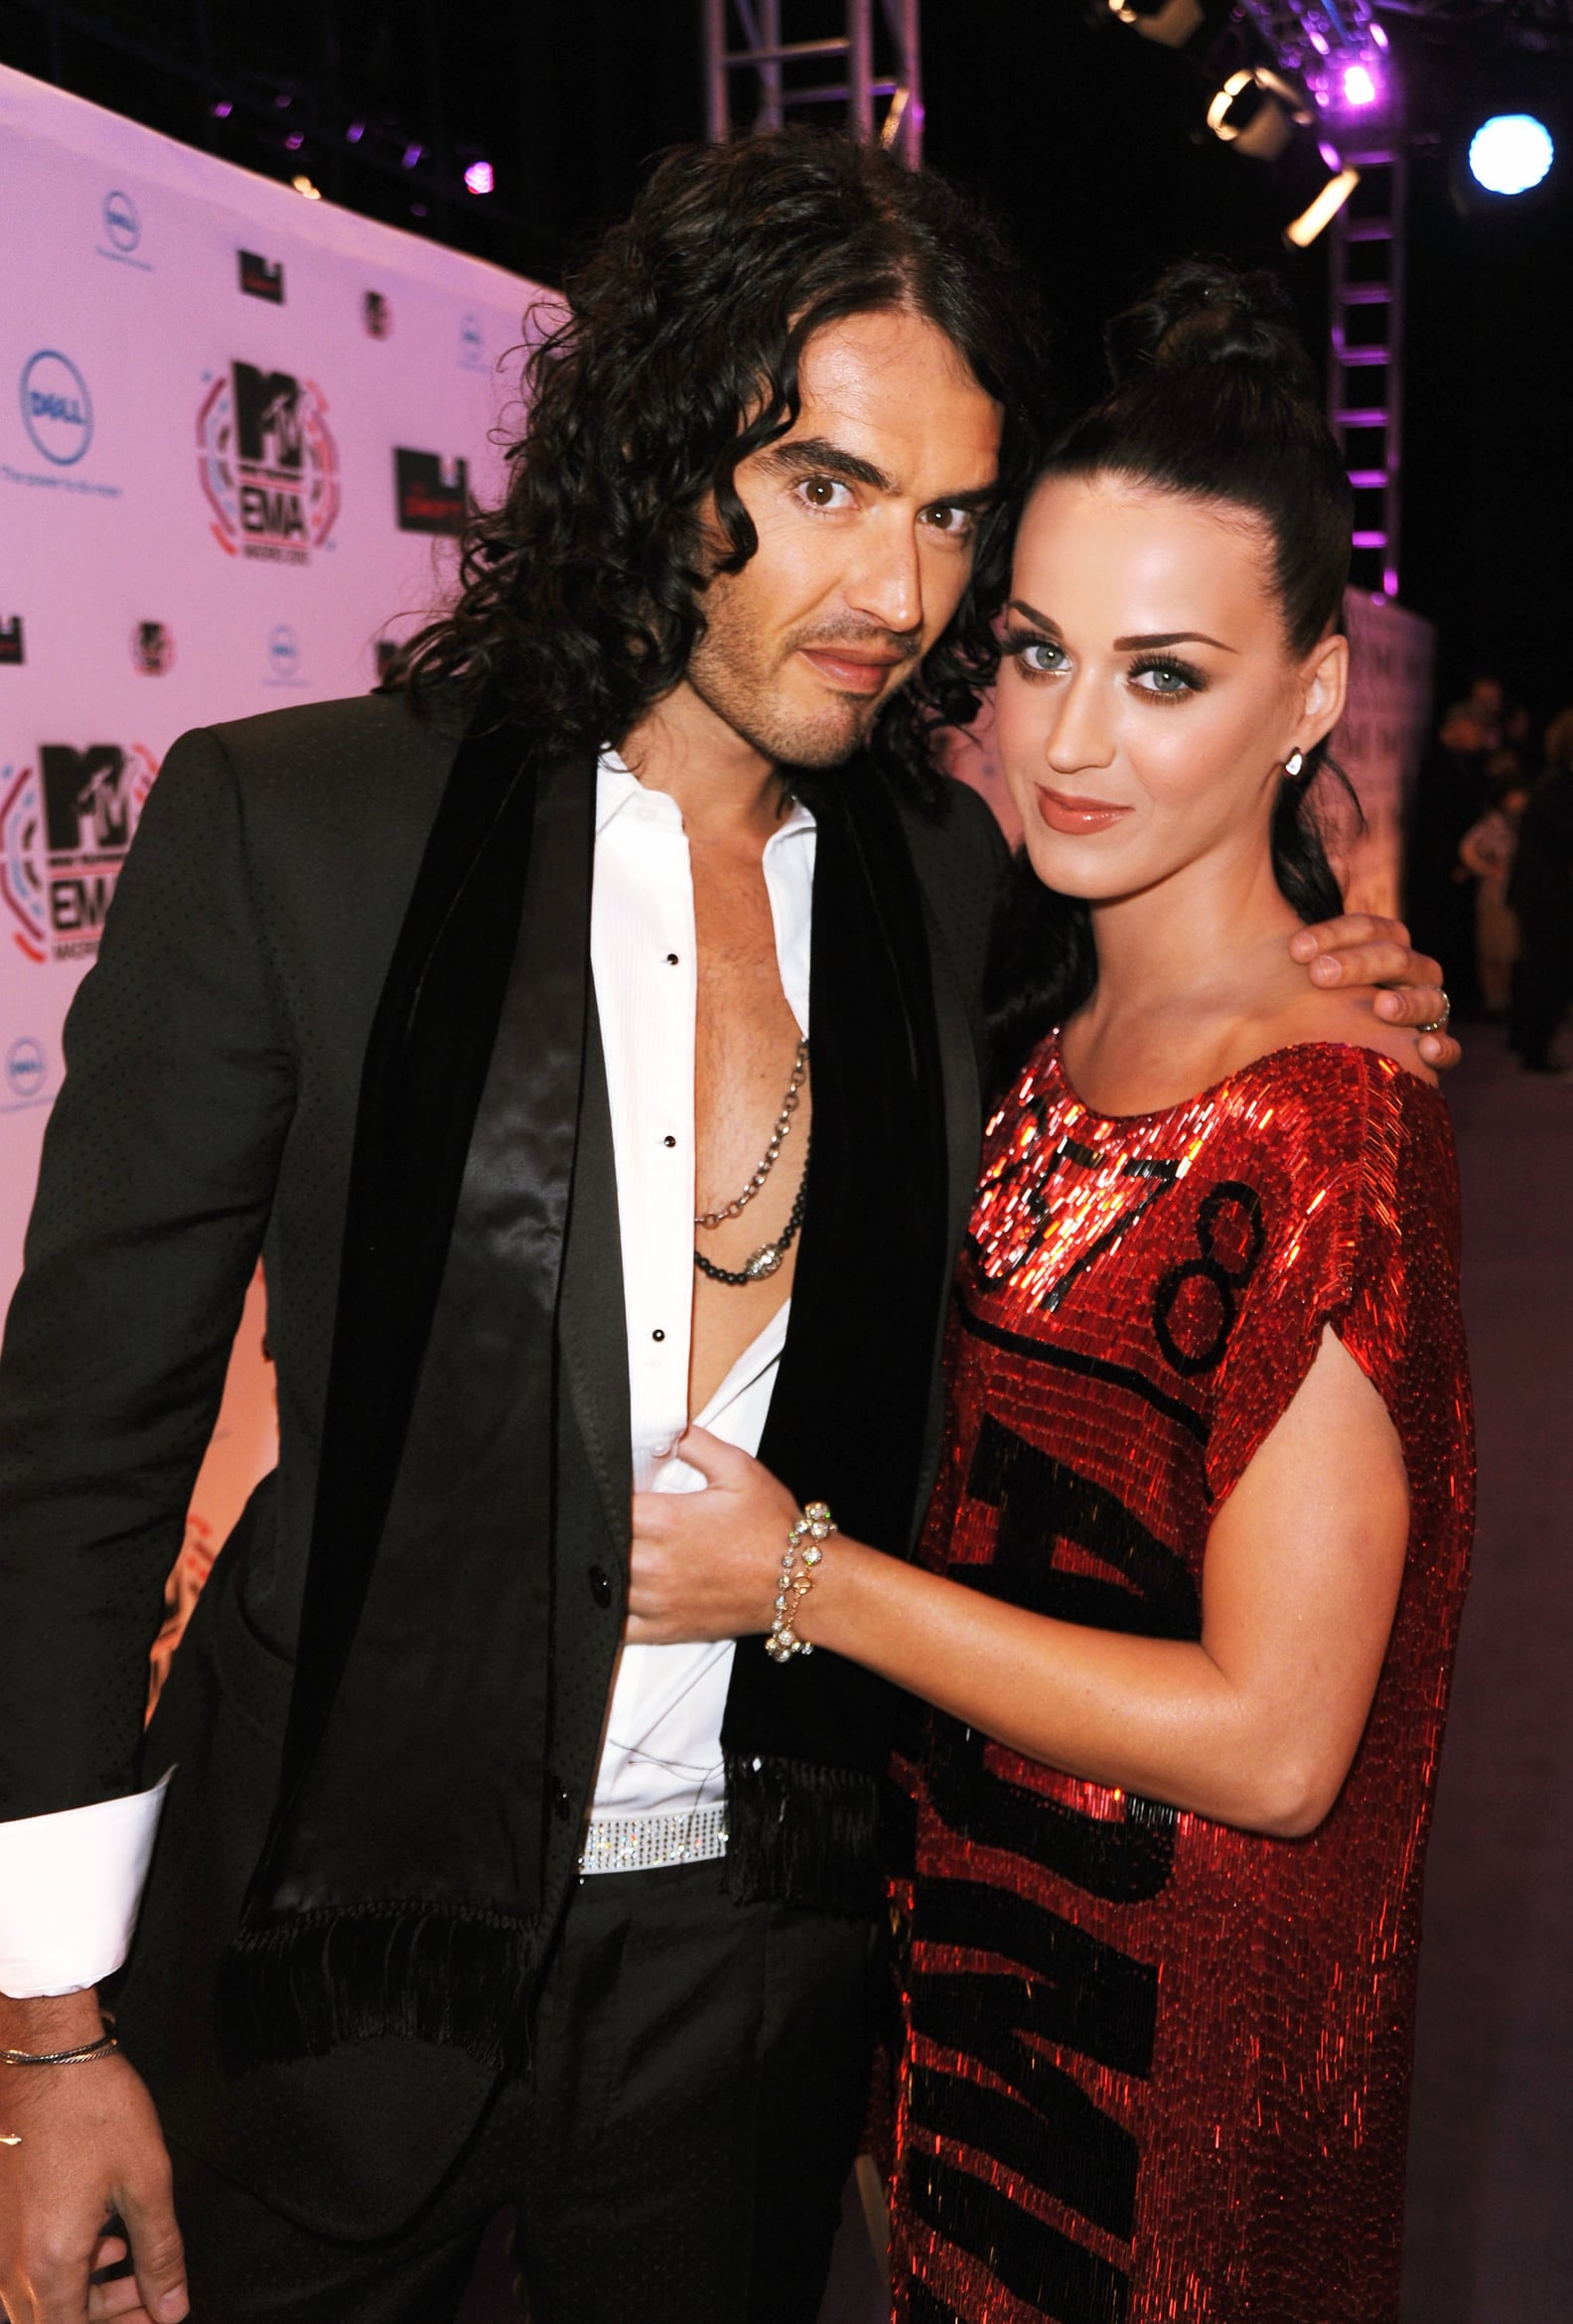 Who Has Katy Perry Dated? | POPSUGAR Celebrity